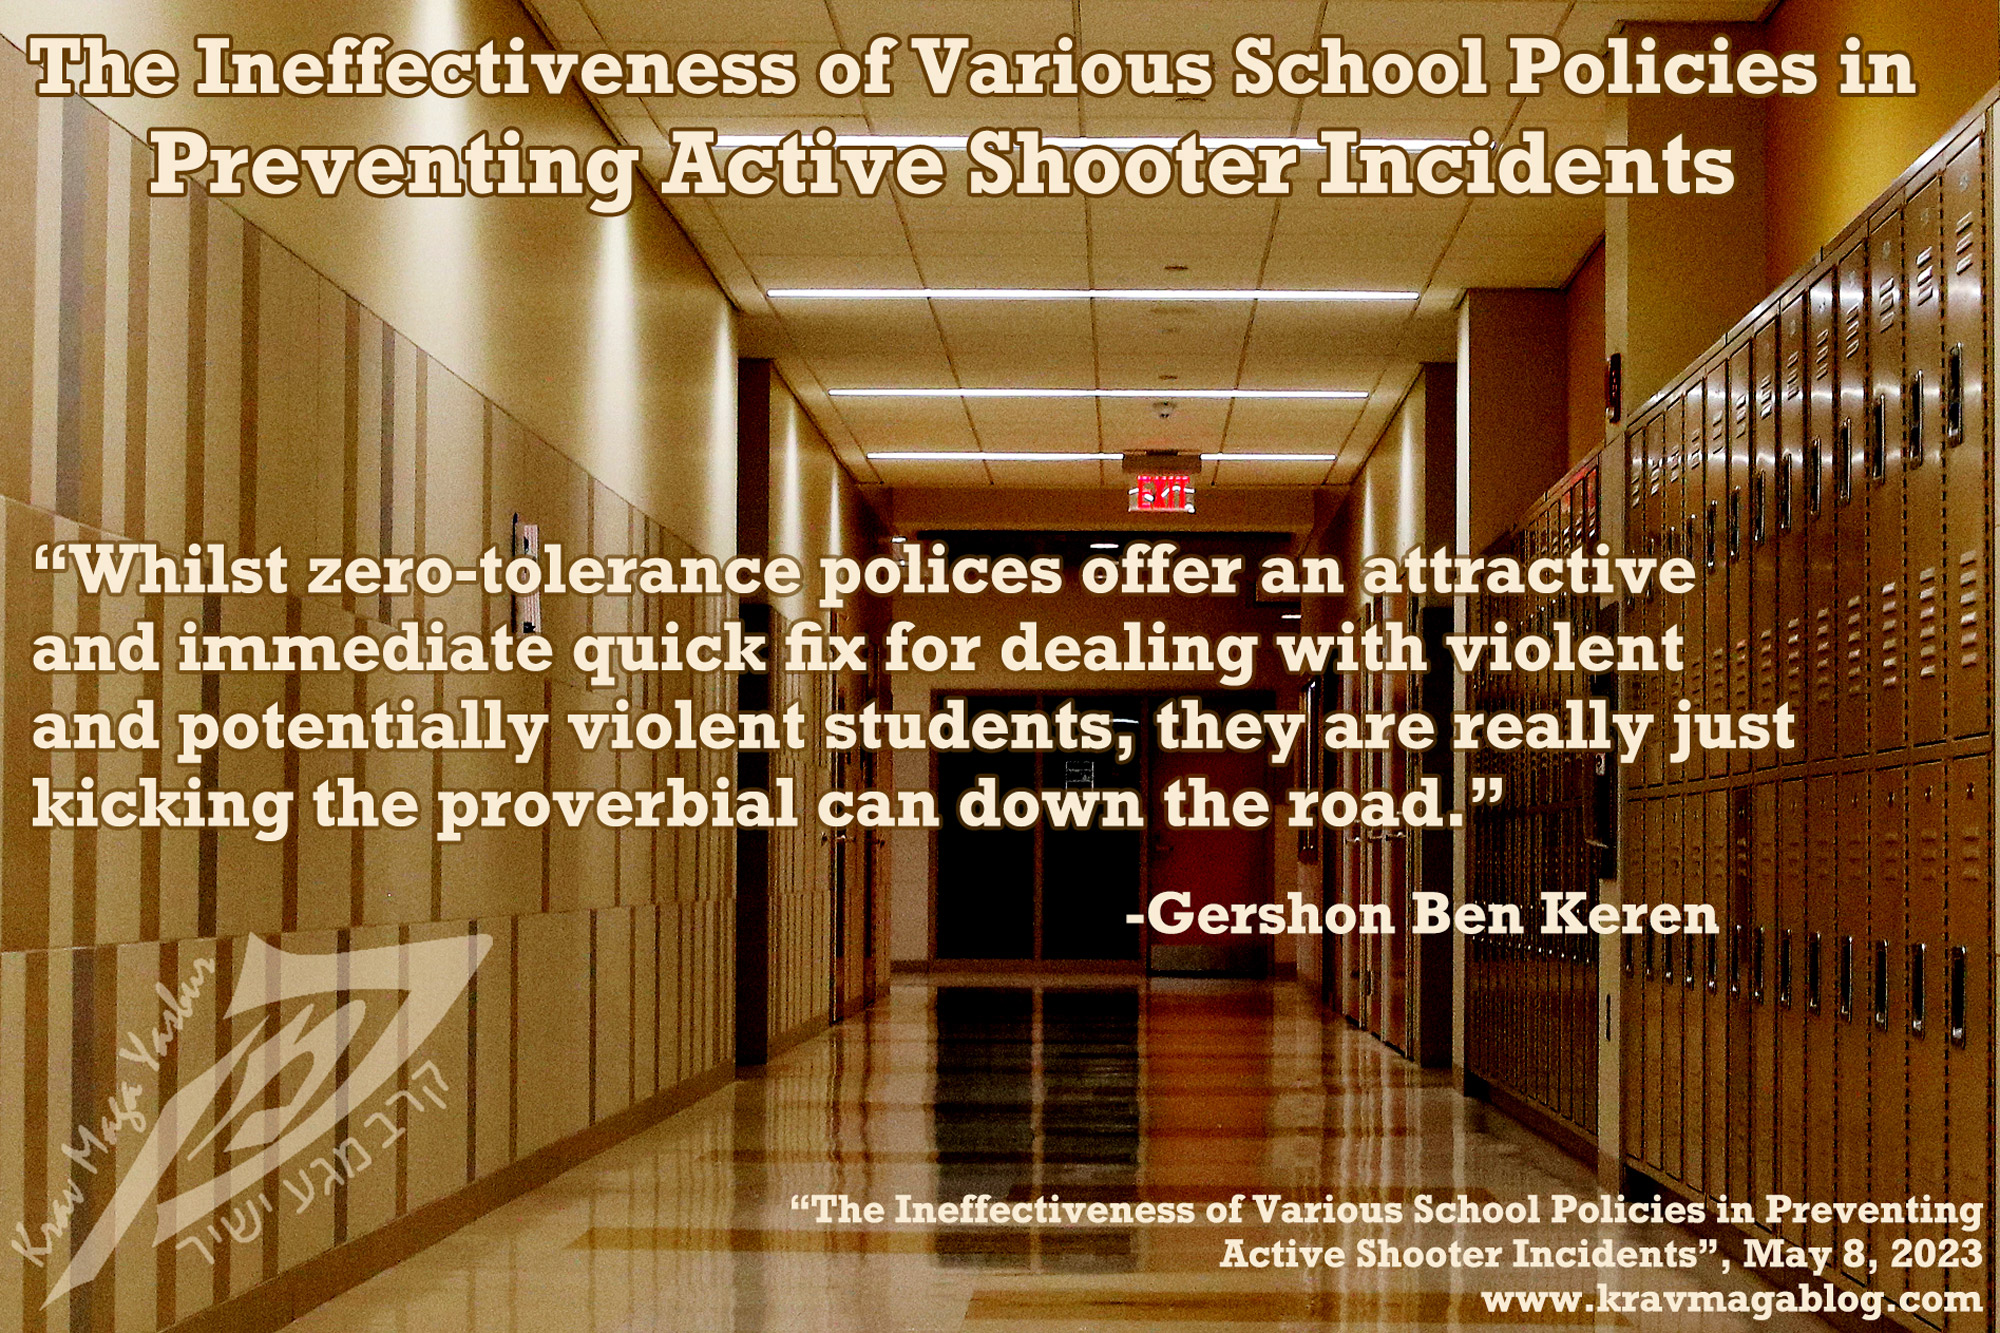 Blog About The Ineffectiveness of Various School Policies in Preventing Active Shooter Incidents